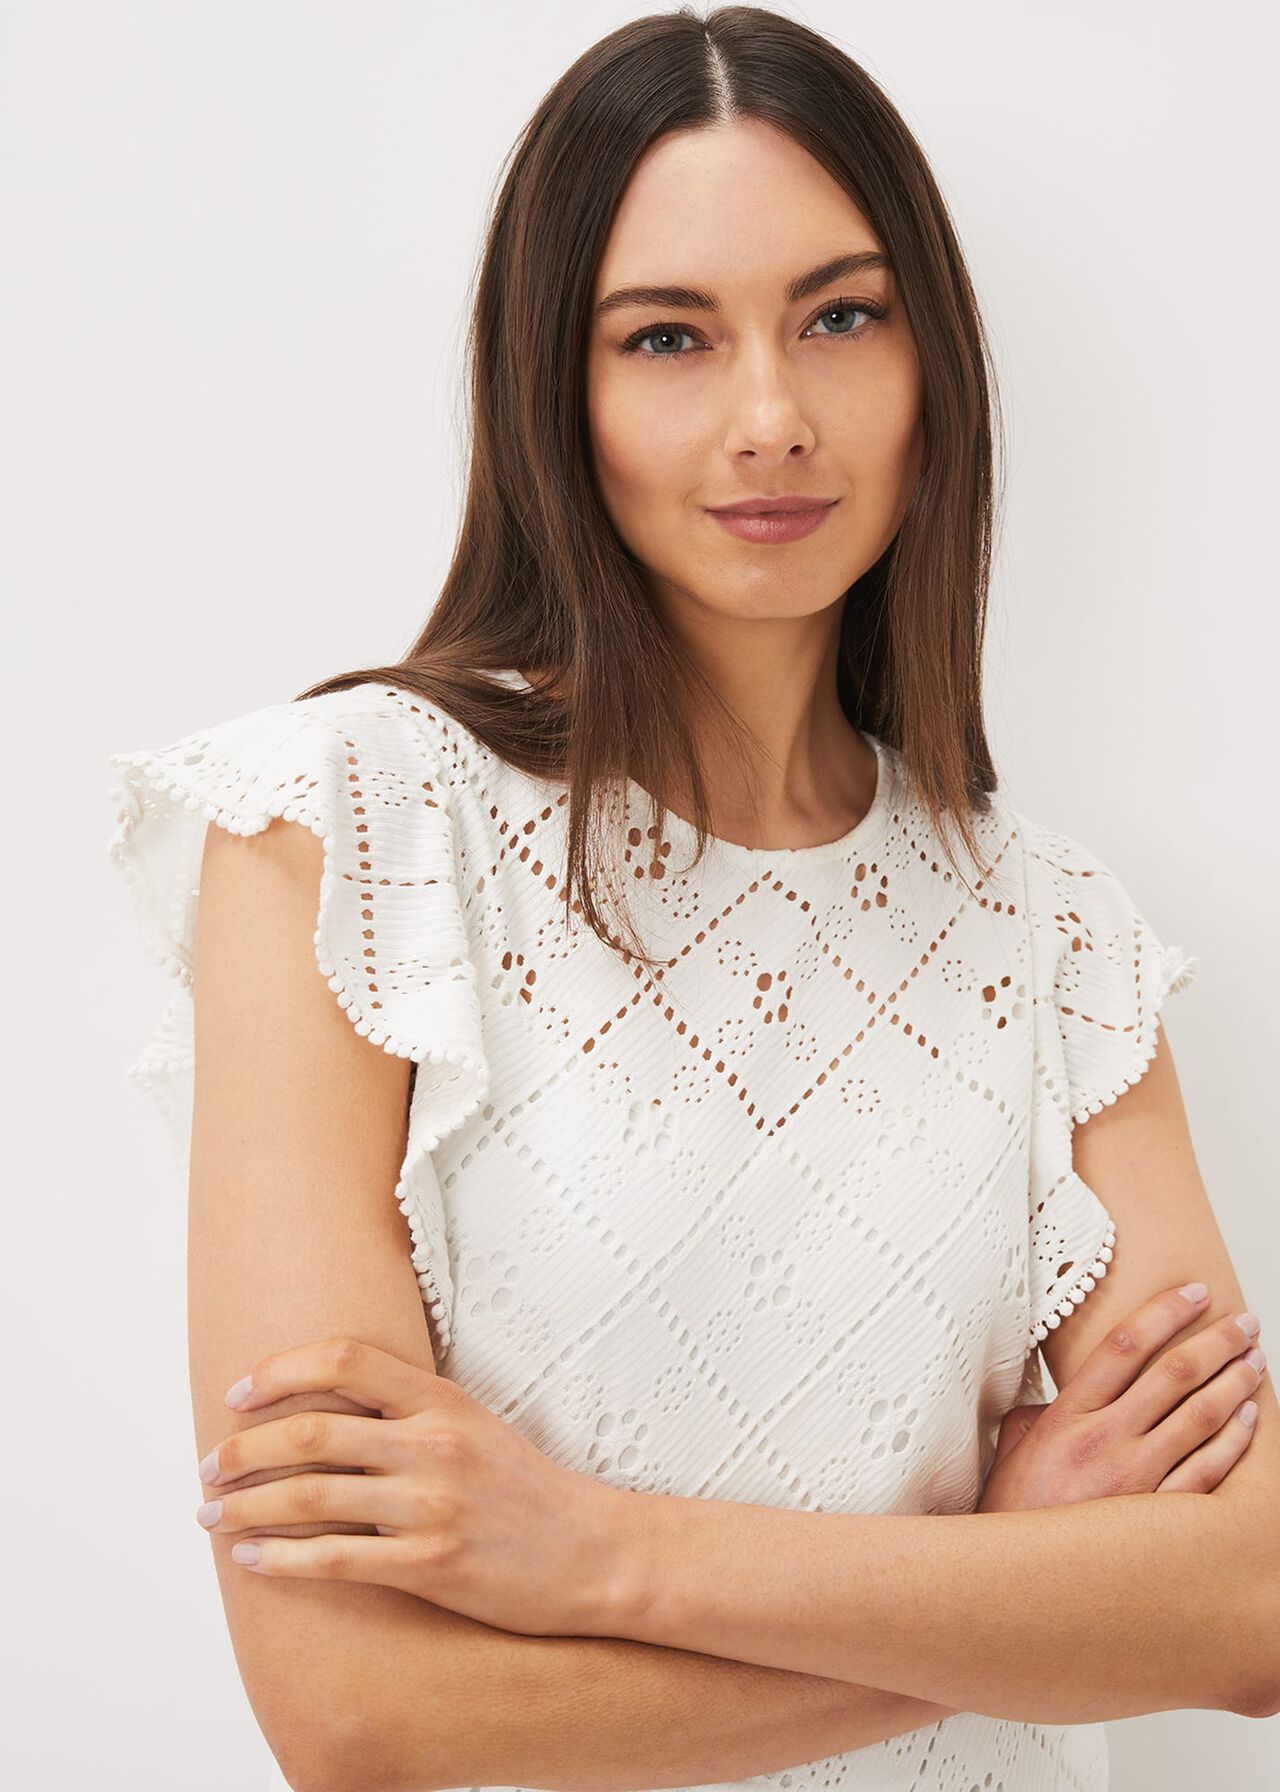 Guilana Cotton Frill Sleeve Lace Top